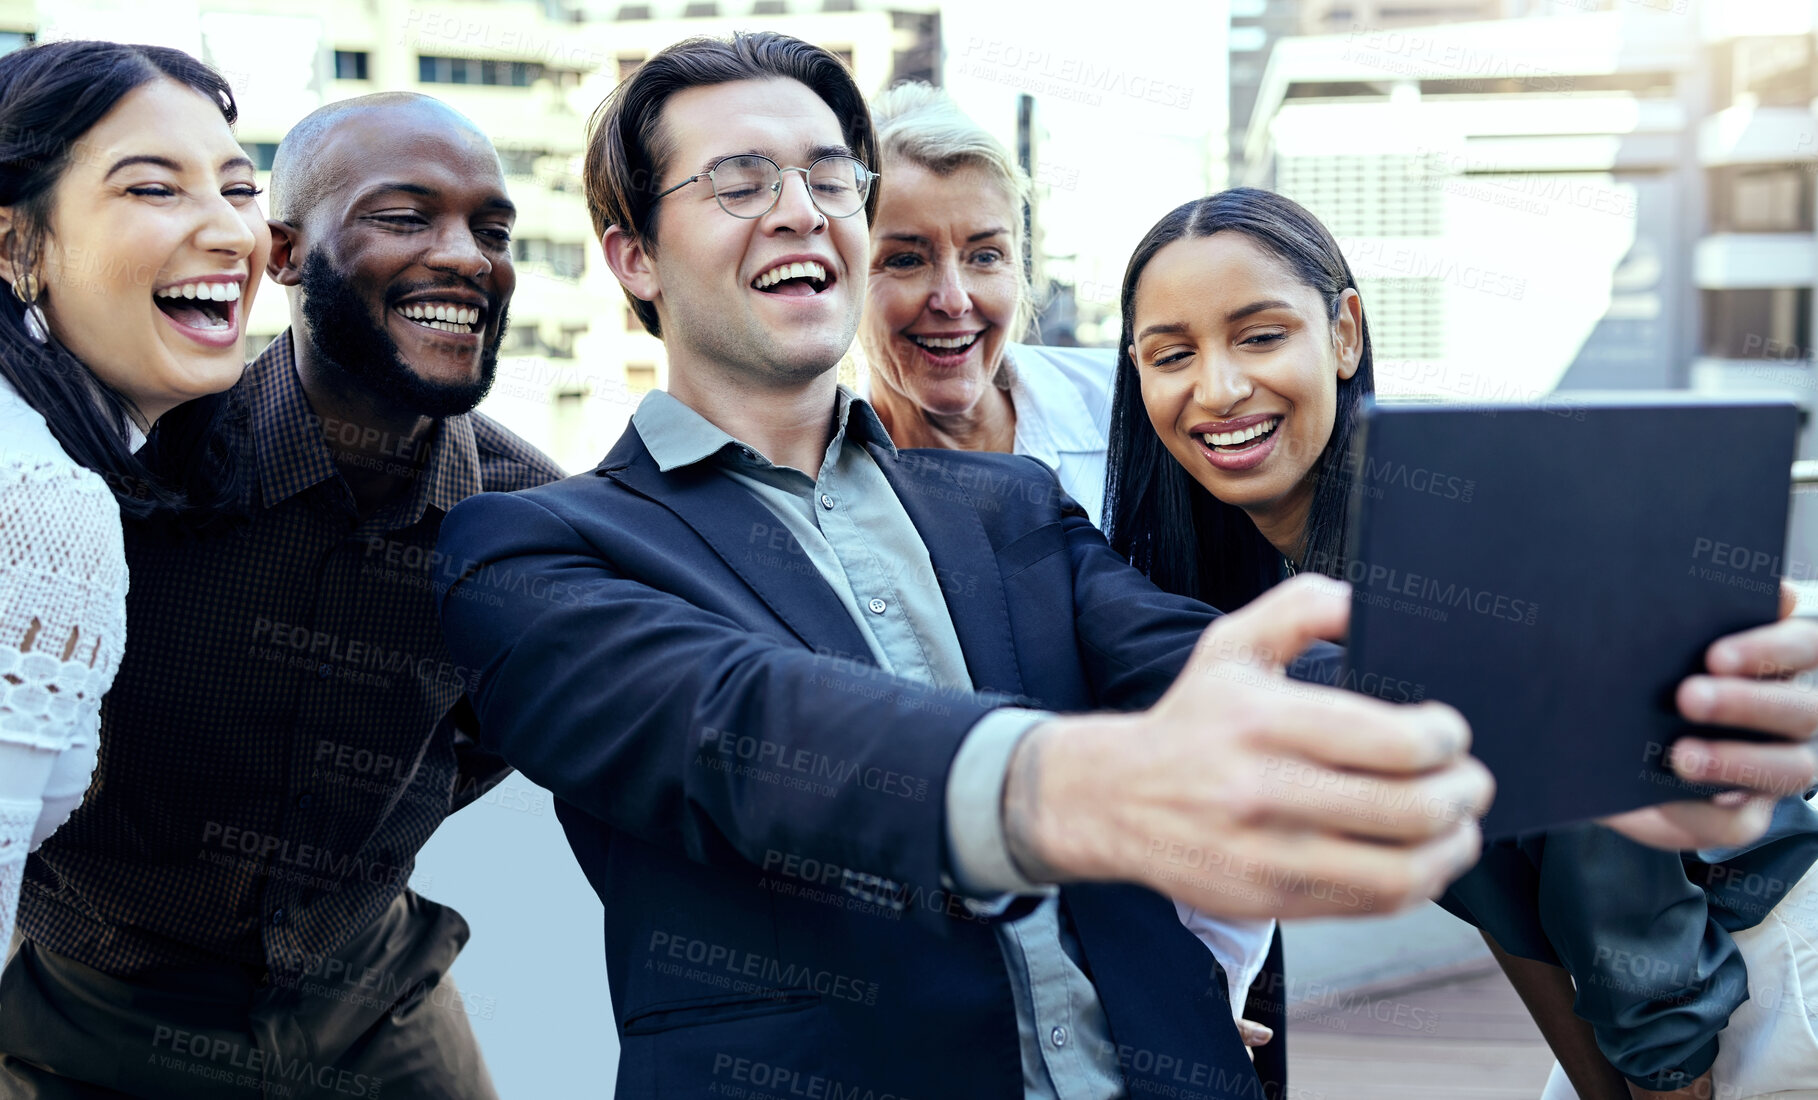 Buy stock photo Tablet, selfie and happy business people in city for team building or having fun. Group smile, technology and employees take photo outdoor for social media, profile picture or friends memory online.